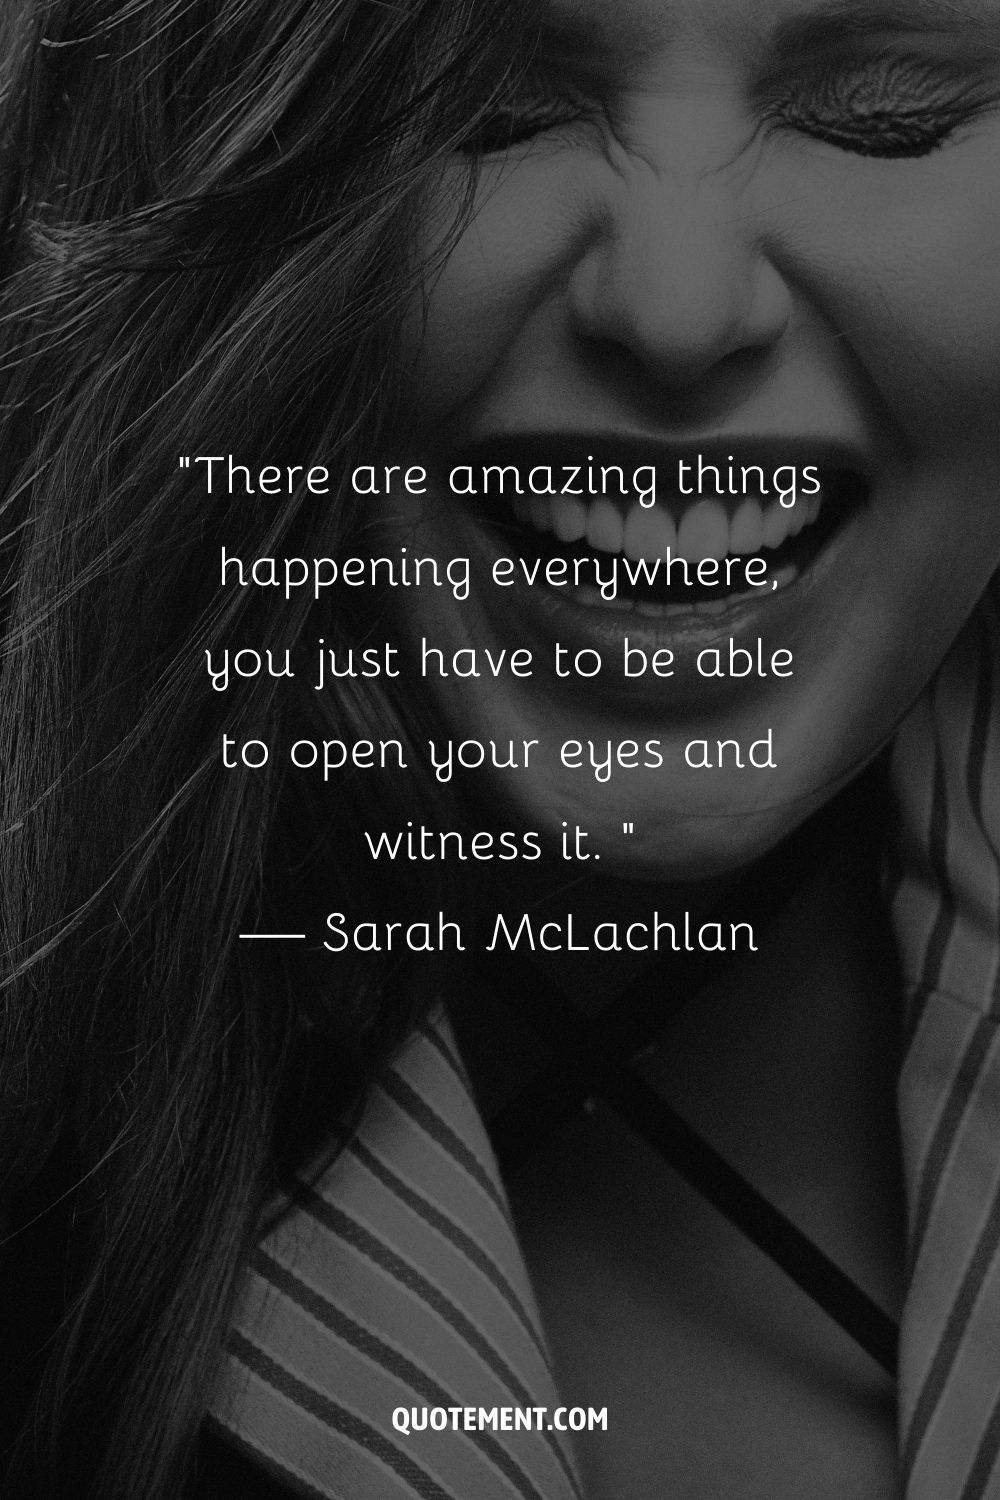 “There are amazing things happening everywhere, you just have to be able to open your eyes and witness it. ” — Sarah McLachlan